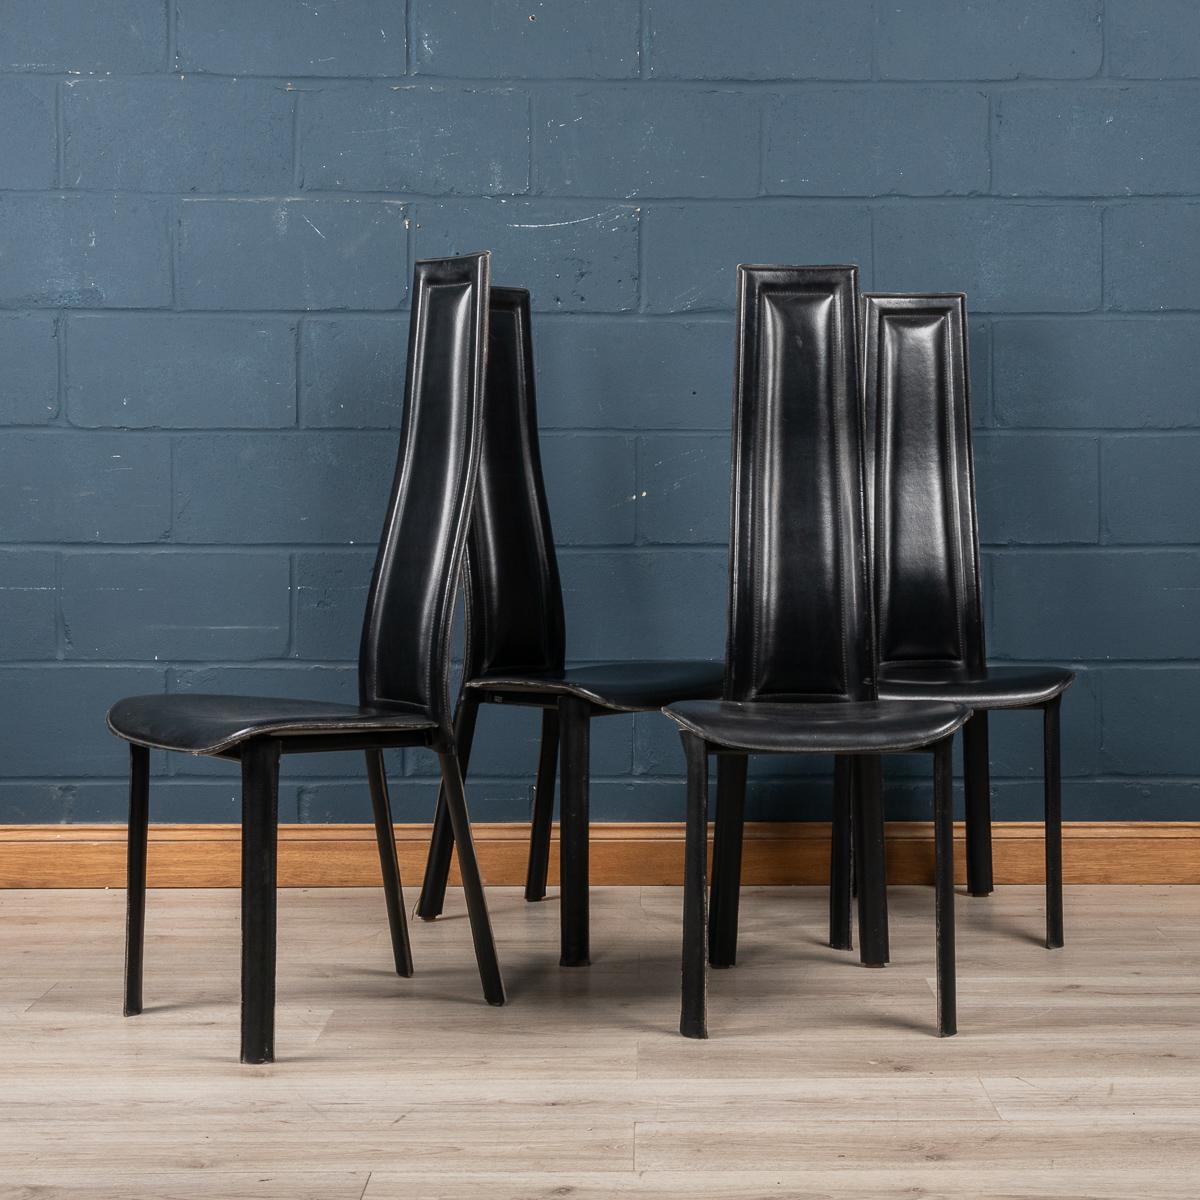 20th Century Italian Set Of Four Dining Chairs By Giorgio Cattelan For Emmepi For Sale 3